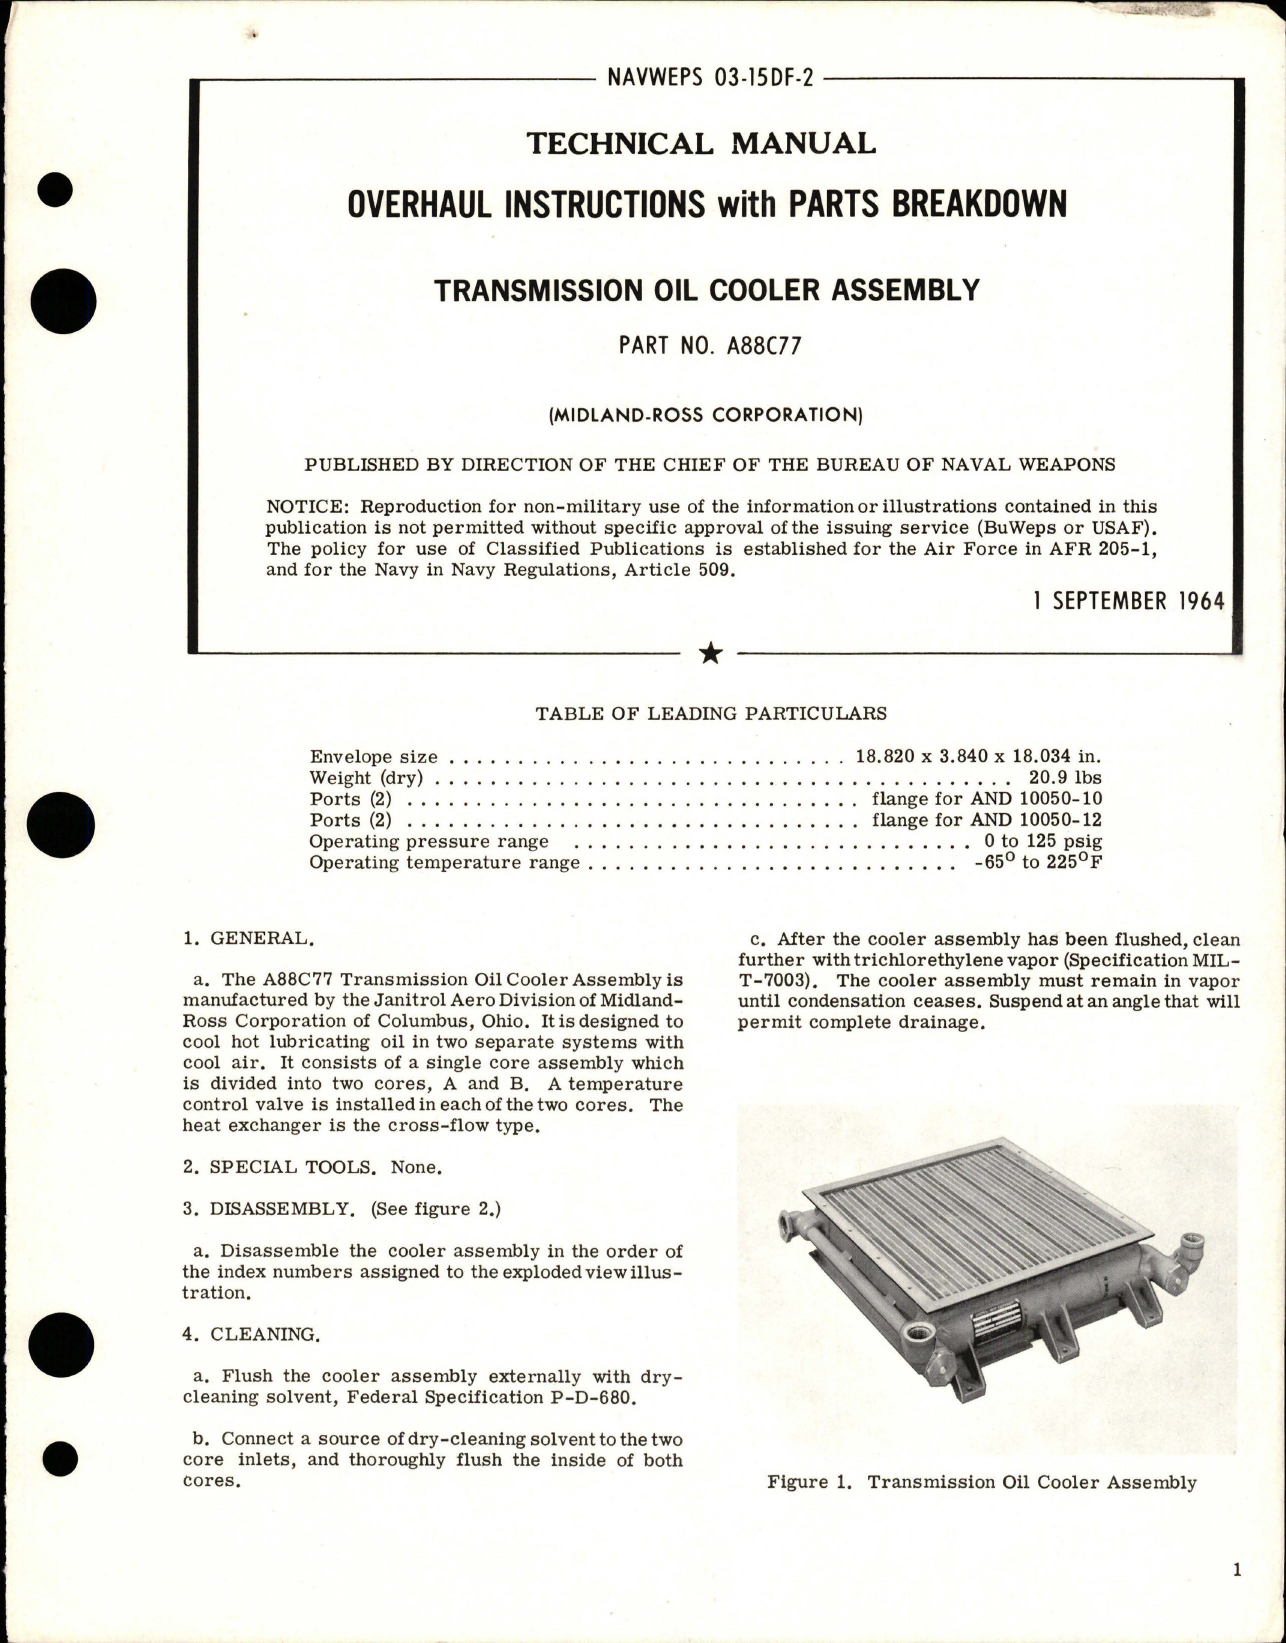 Sample page 1 from AirCorps Library document: Overhaul Instructions with Parts for Transmission Oil Cooler Assembly - Part A88C77